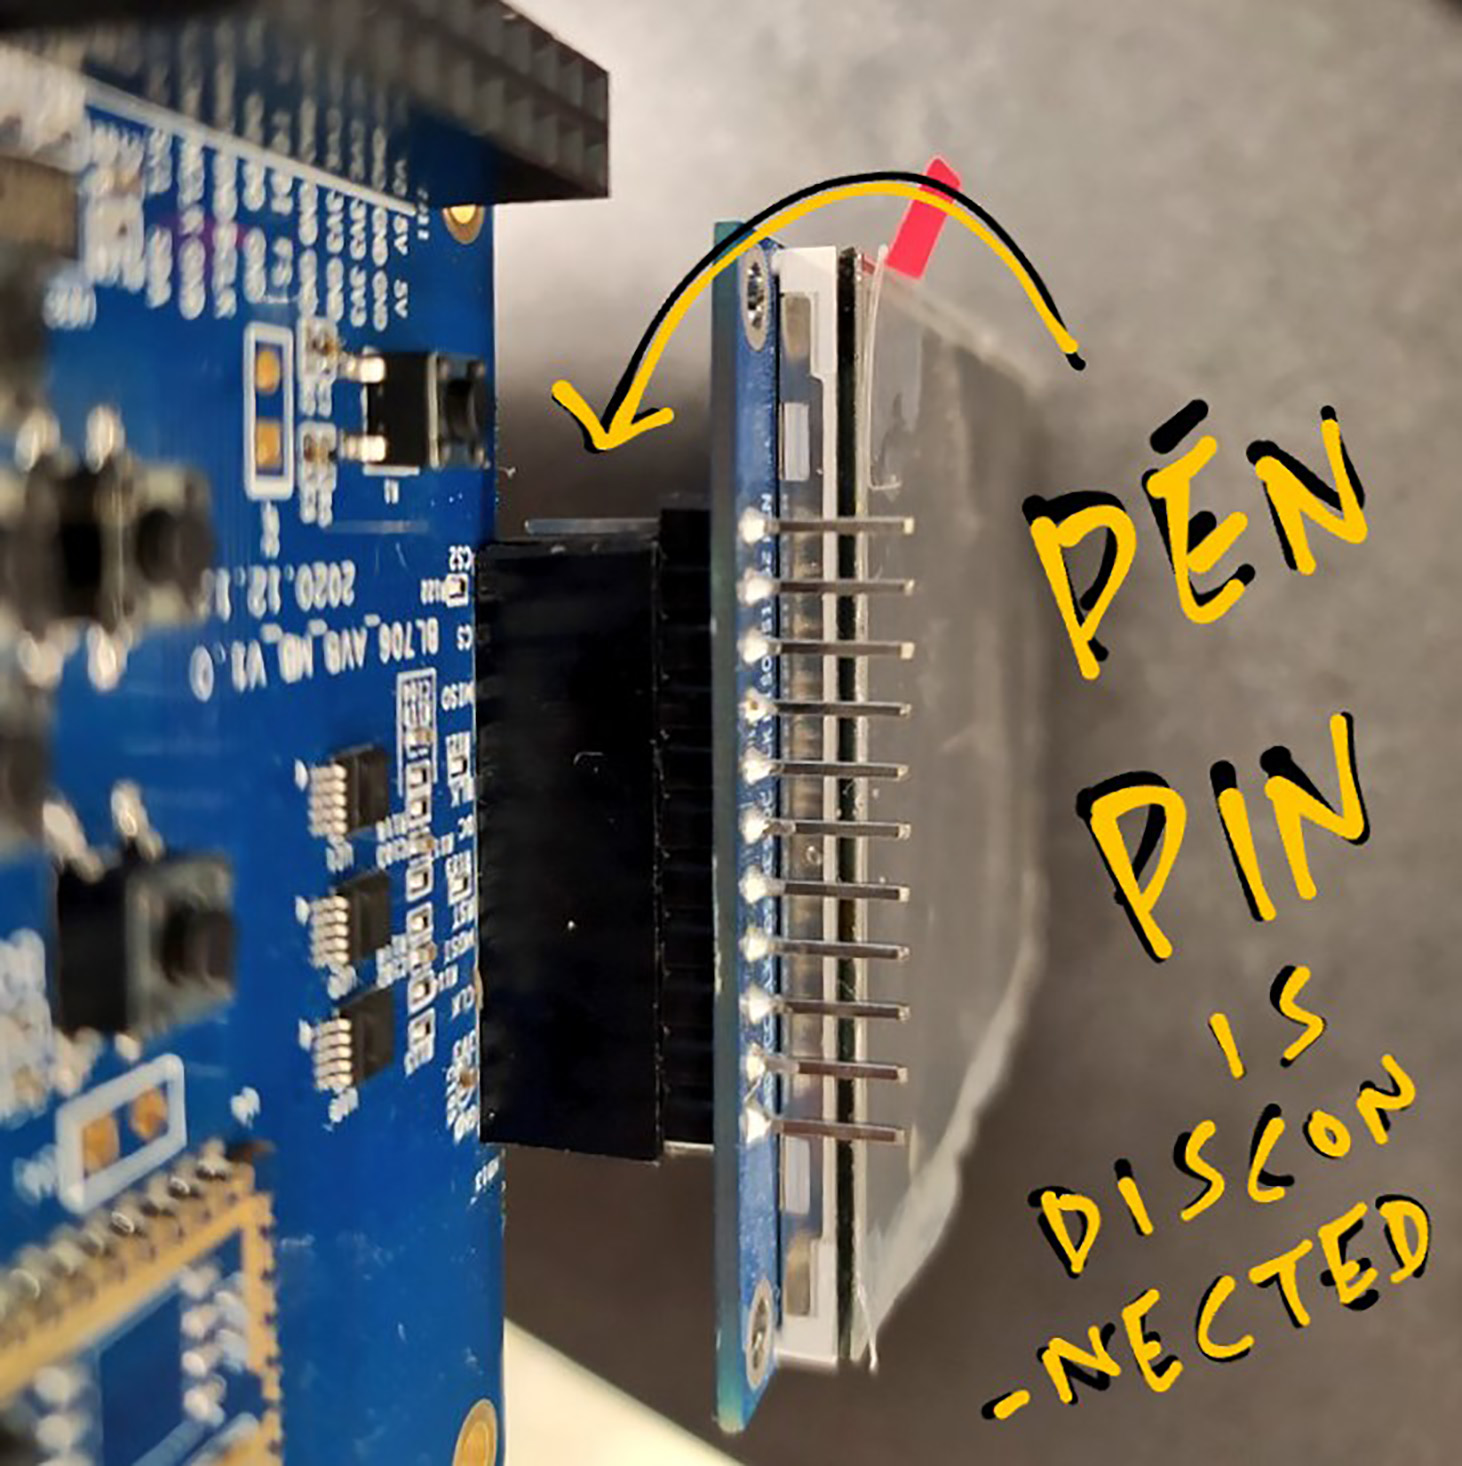 PEN Pin must be disconnected